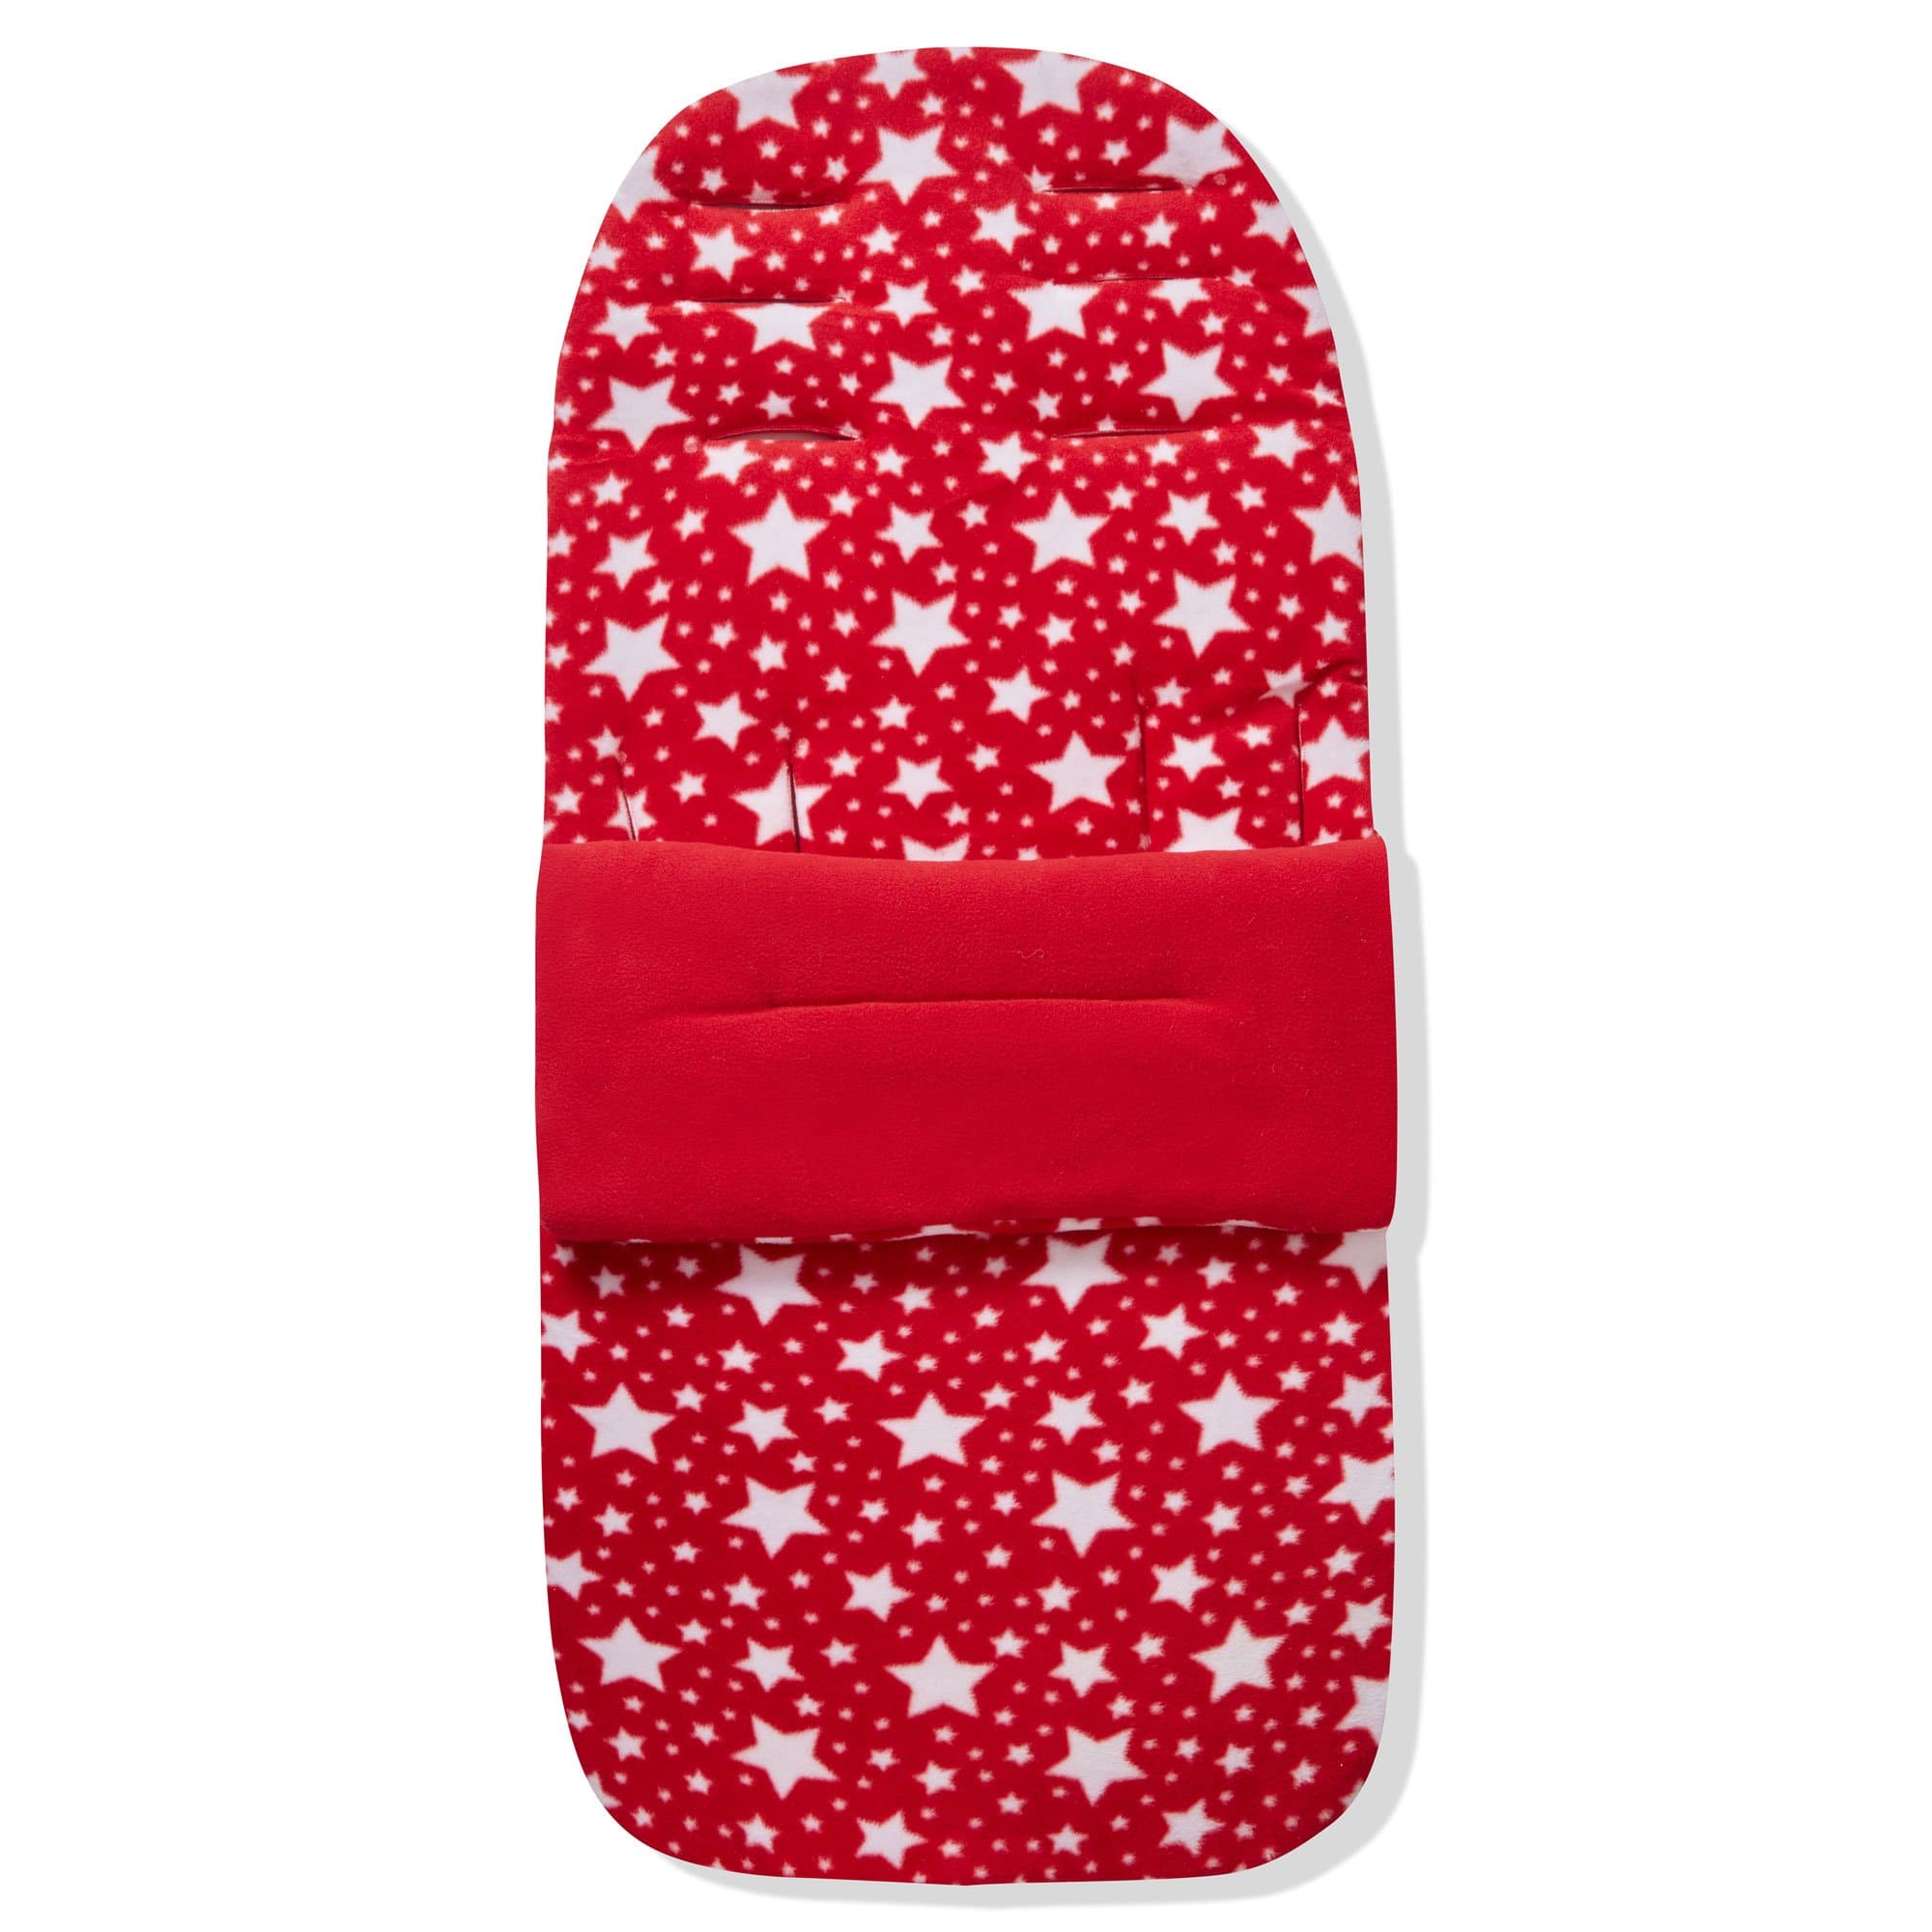 Fleece Footmuff / Cosy Toes Compatible with Noukies - Red Star / Fits All Models | For Your Little One